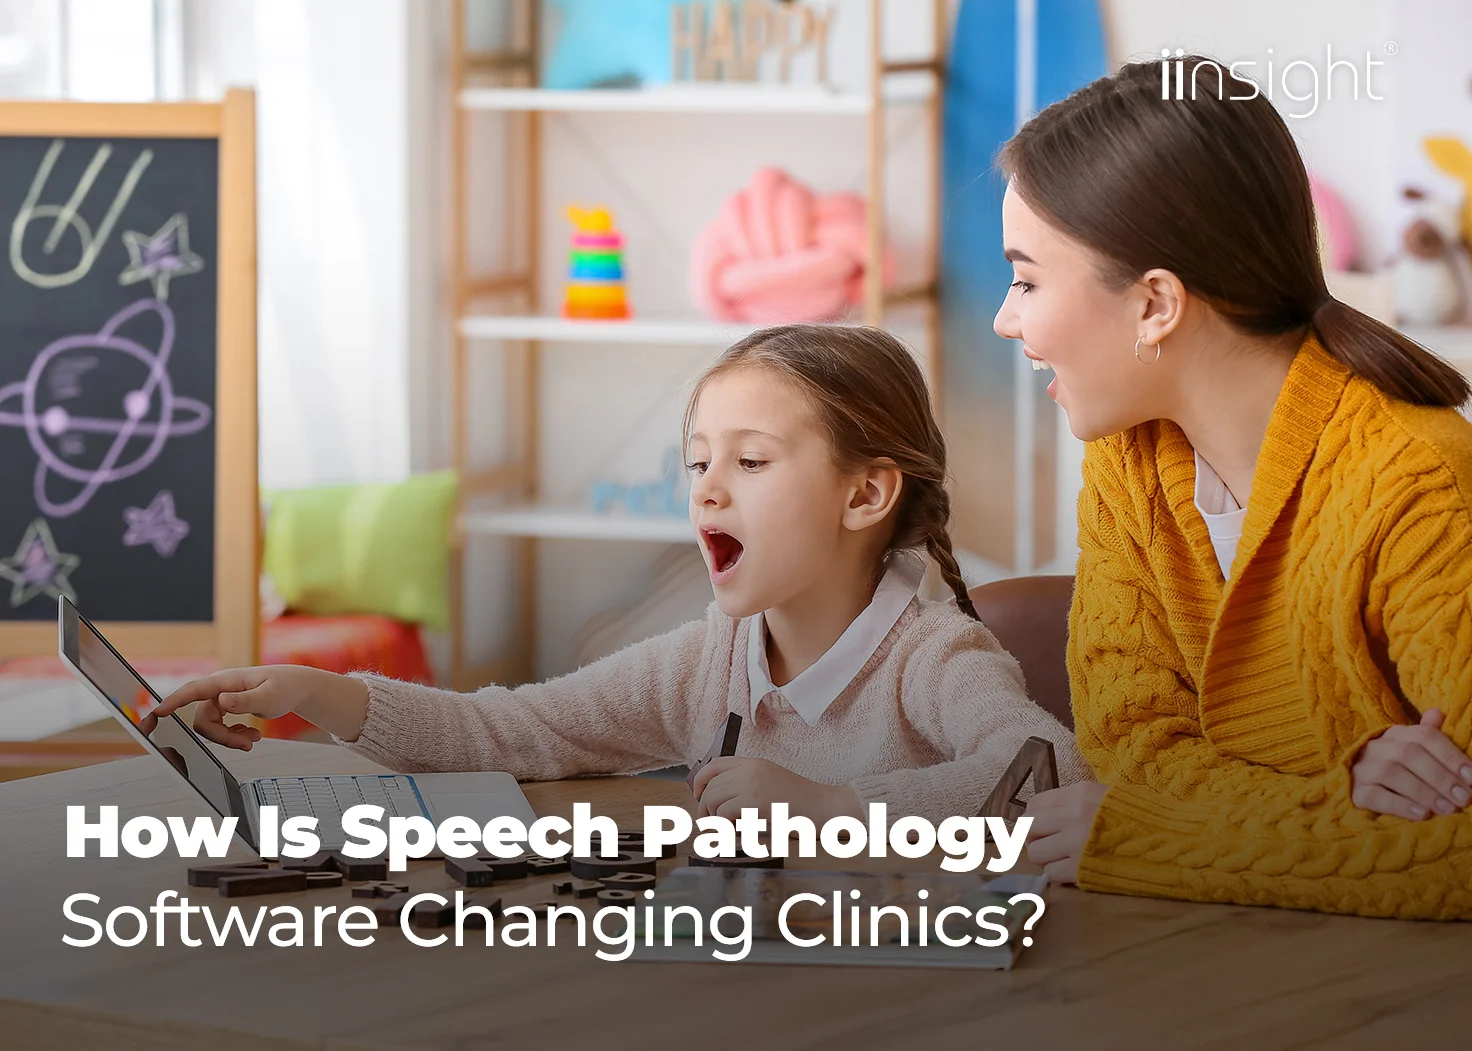 How Is Speech Pathology Software Changing Clinics?